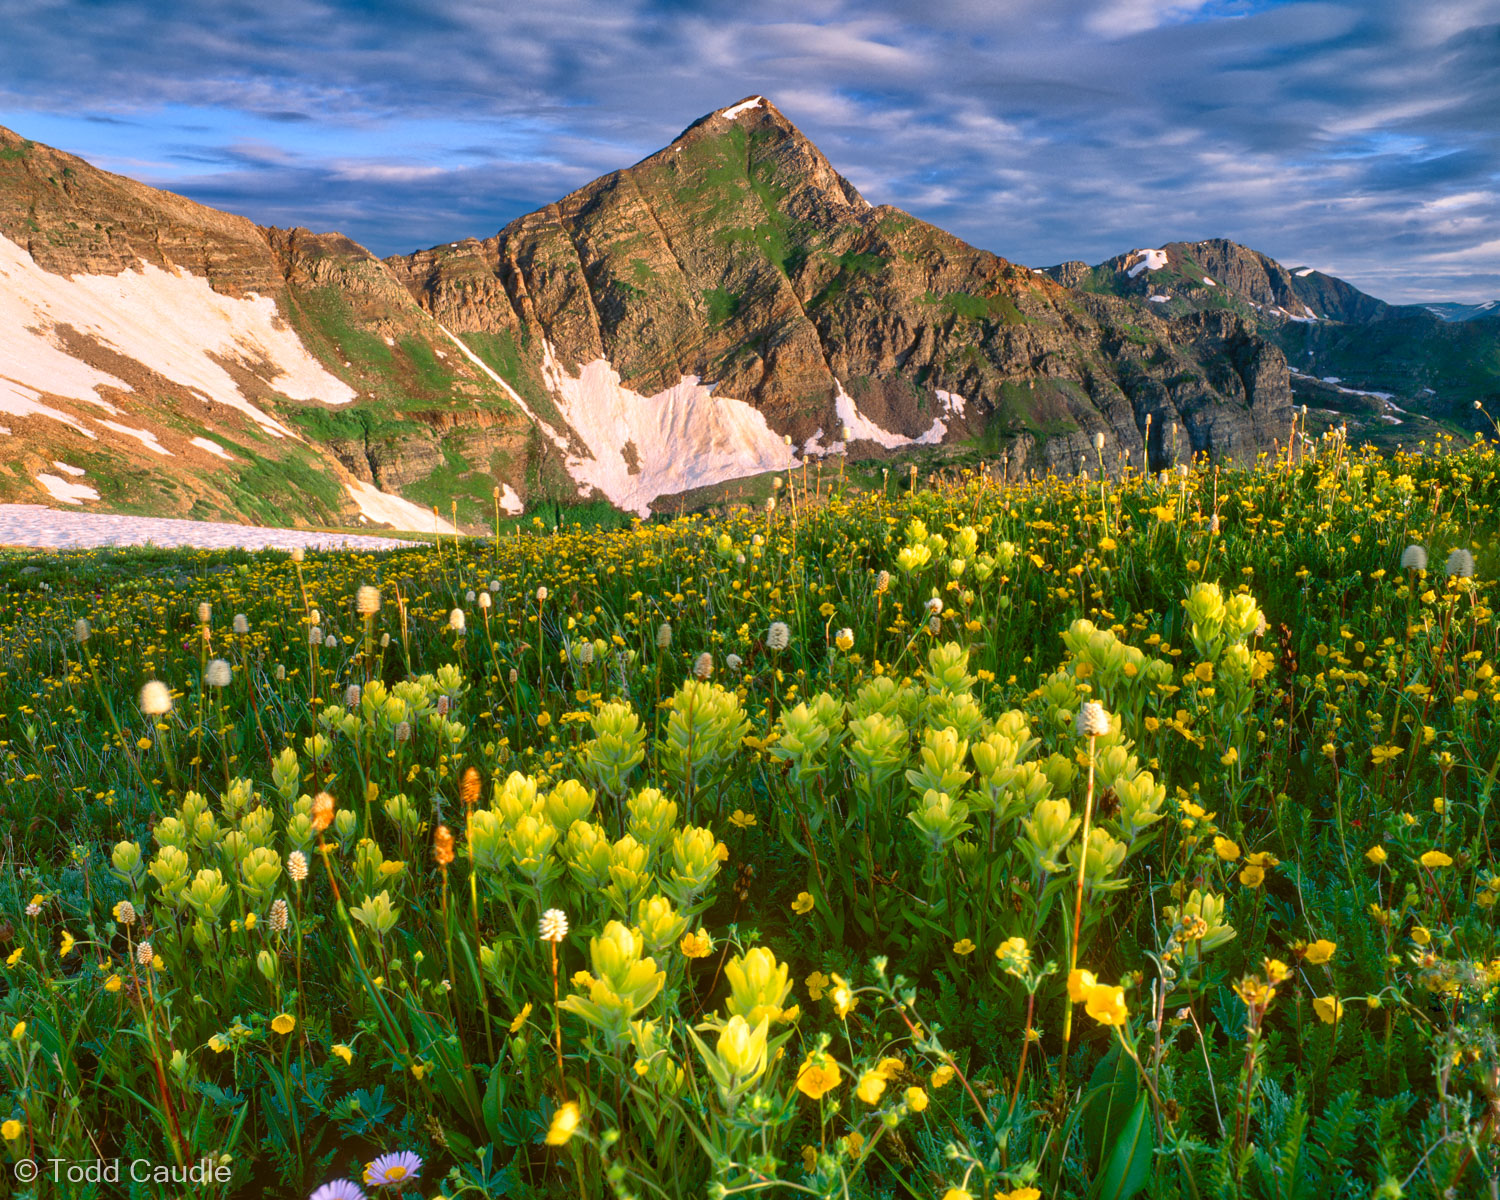 Pale yellow Indian paintbrush on Scarp Ridge, with the pyramid-shaped Afley Peak rising beyond. The ridge drops precipitously...